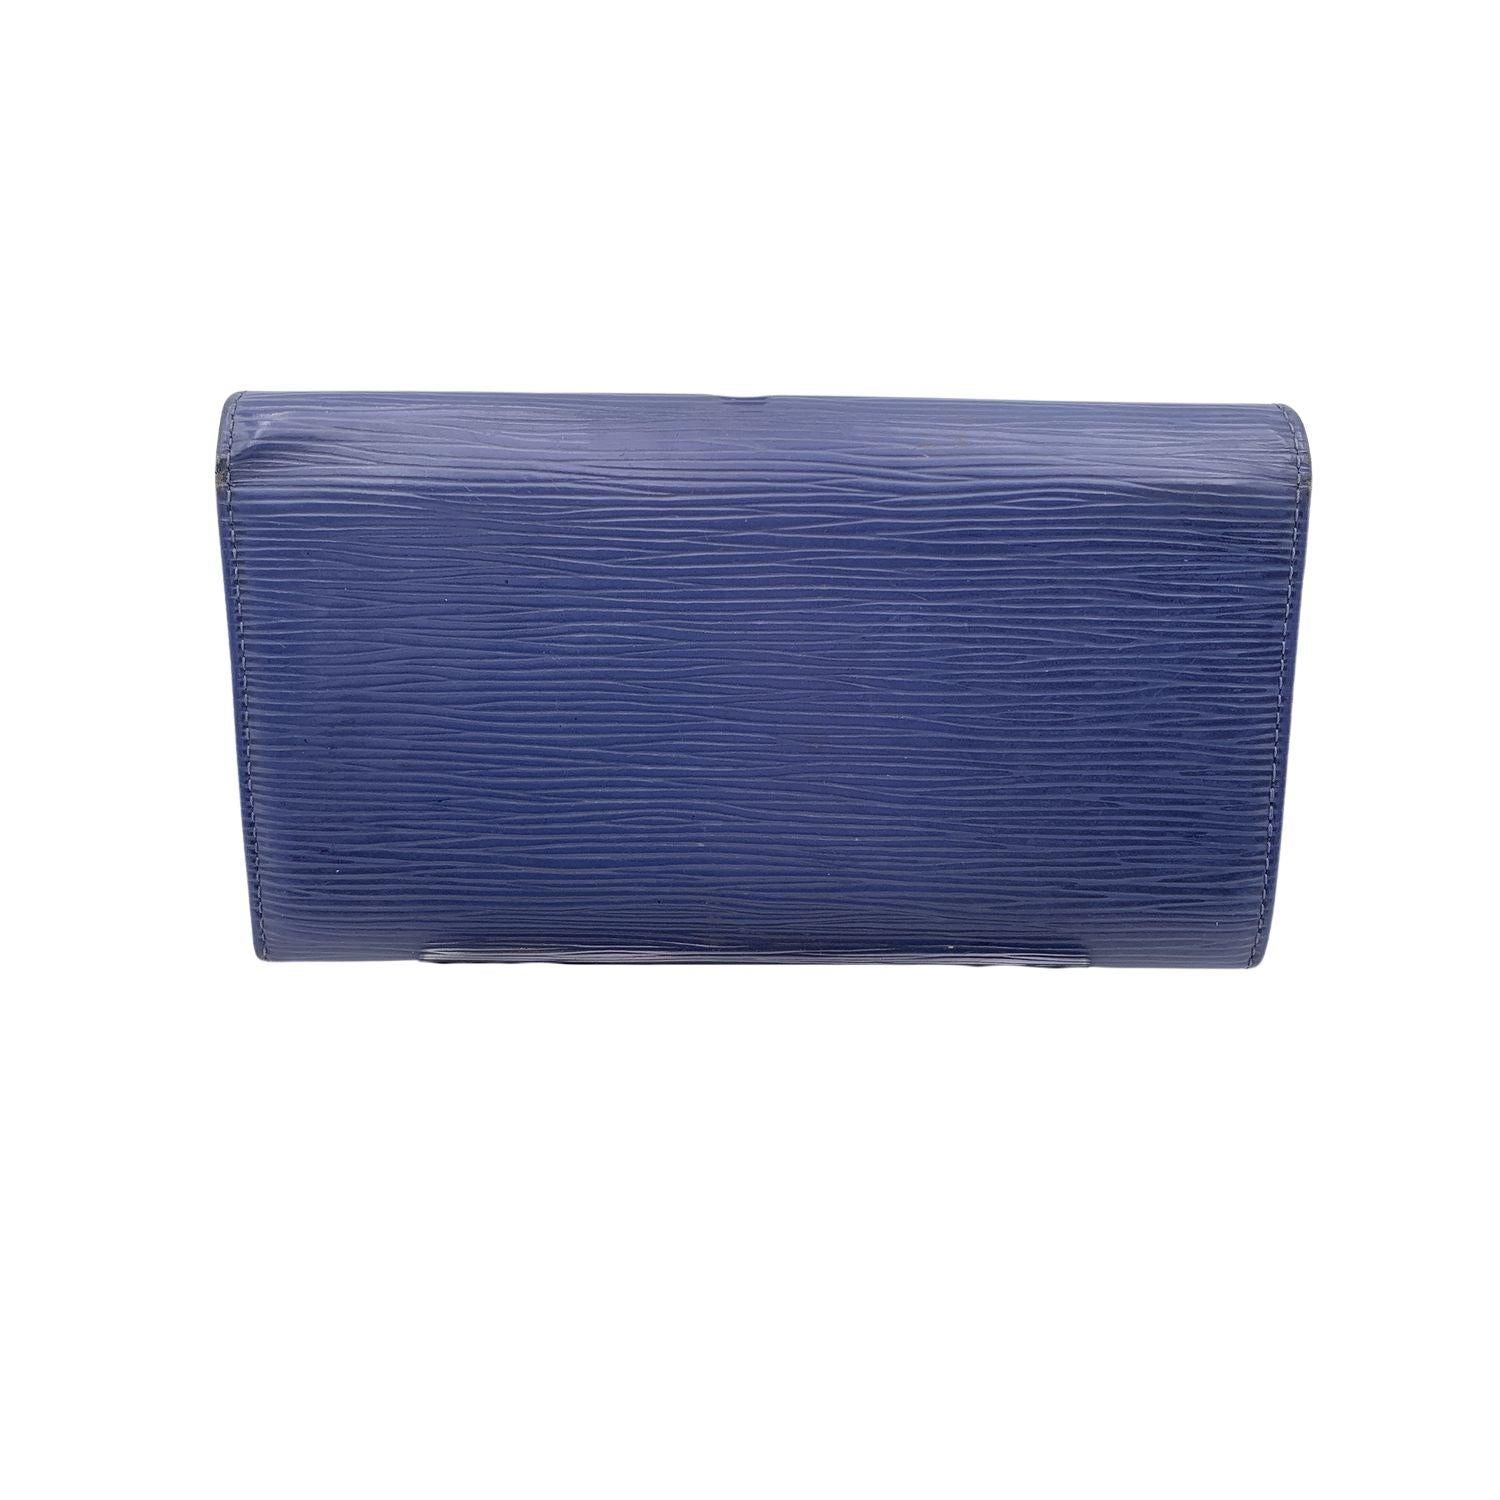 Louis Vuitton 'Sarah' wallet, in blue color. Epi leather. Interior fully lined in leather. Flap with snap closure. 2 flat open pockets under the flap. 1 coin compartment with zip closure. 2 bill compartments. 4 credit card slots and 1 flat open